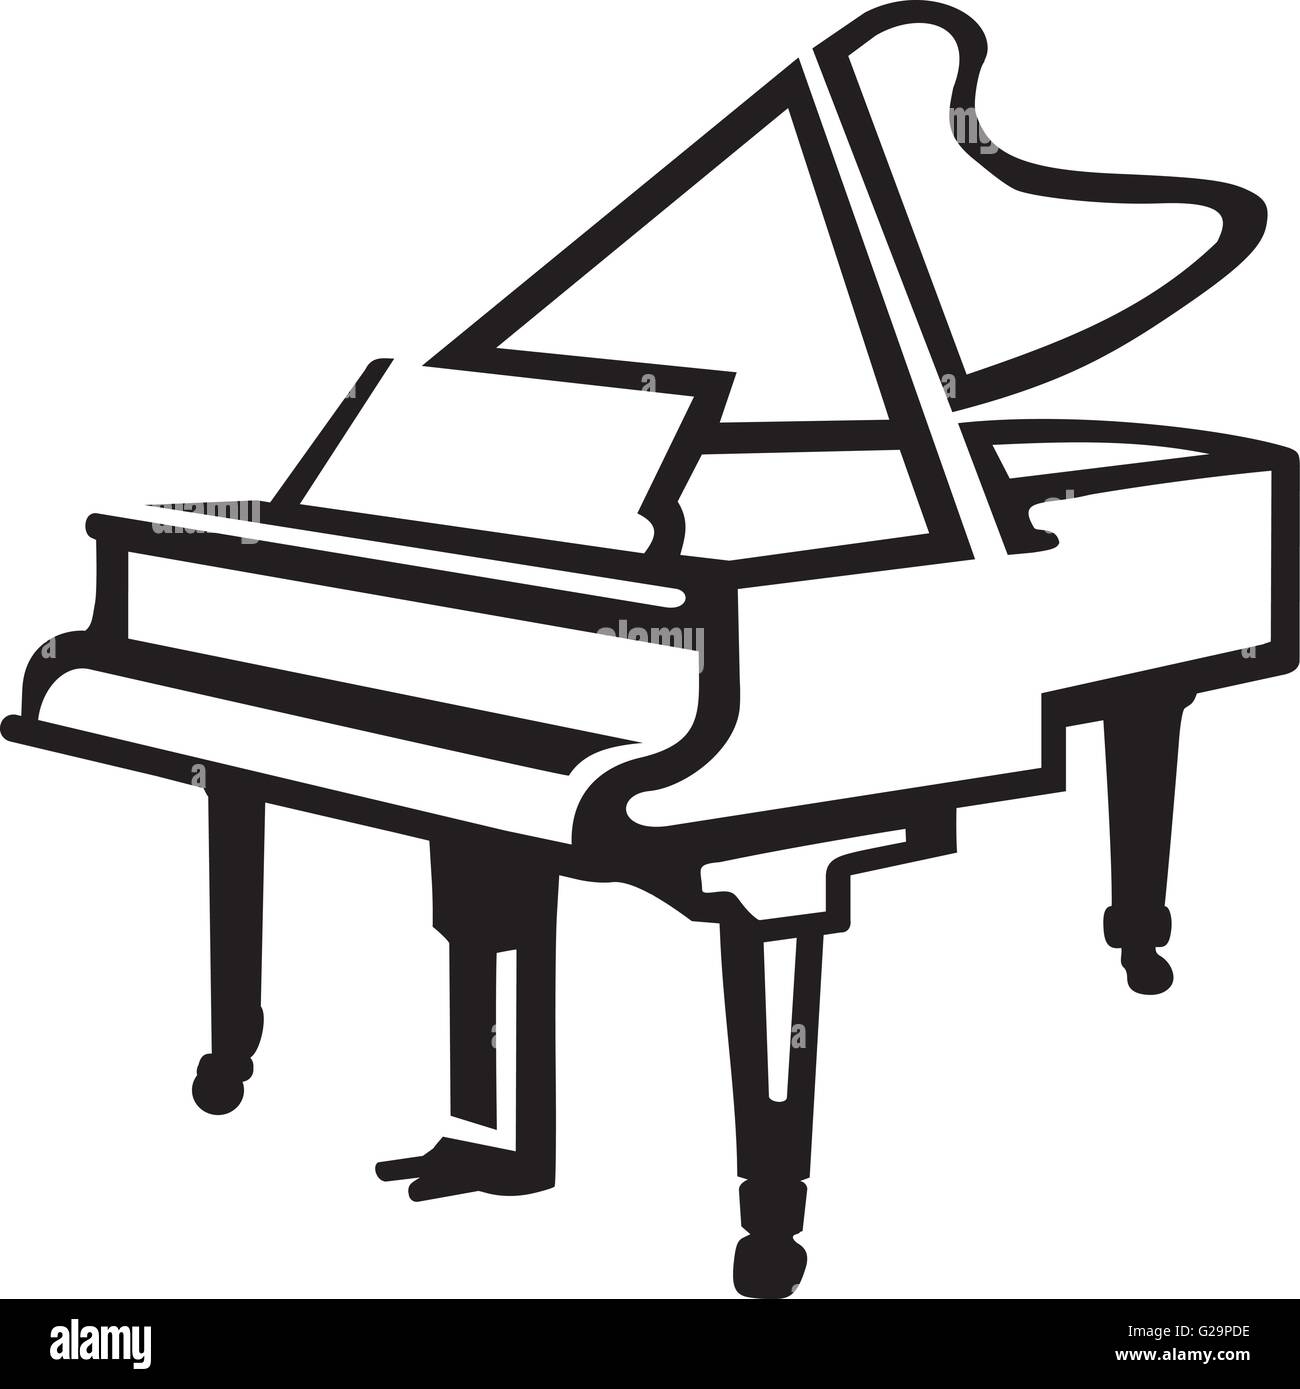 How To Draw A Grand Piano